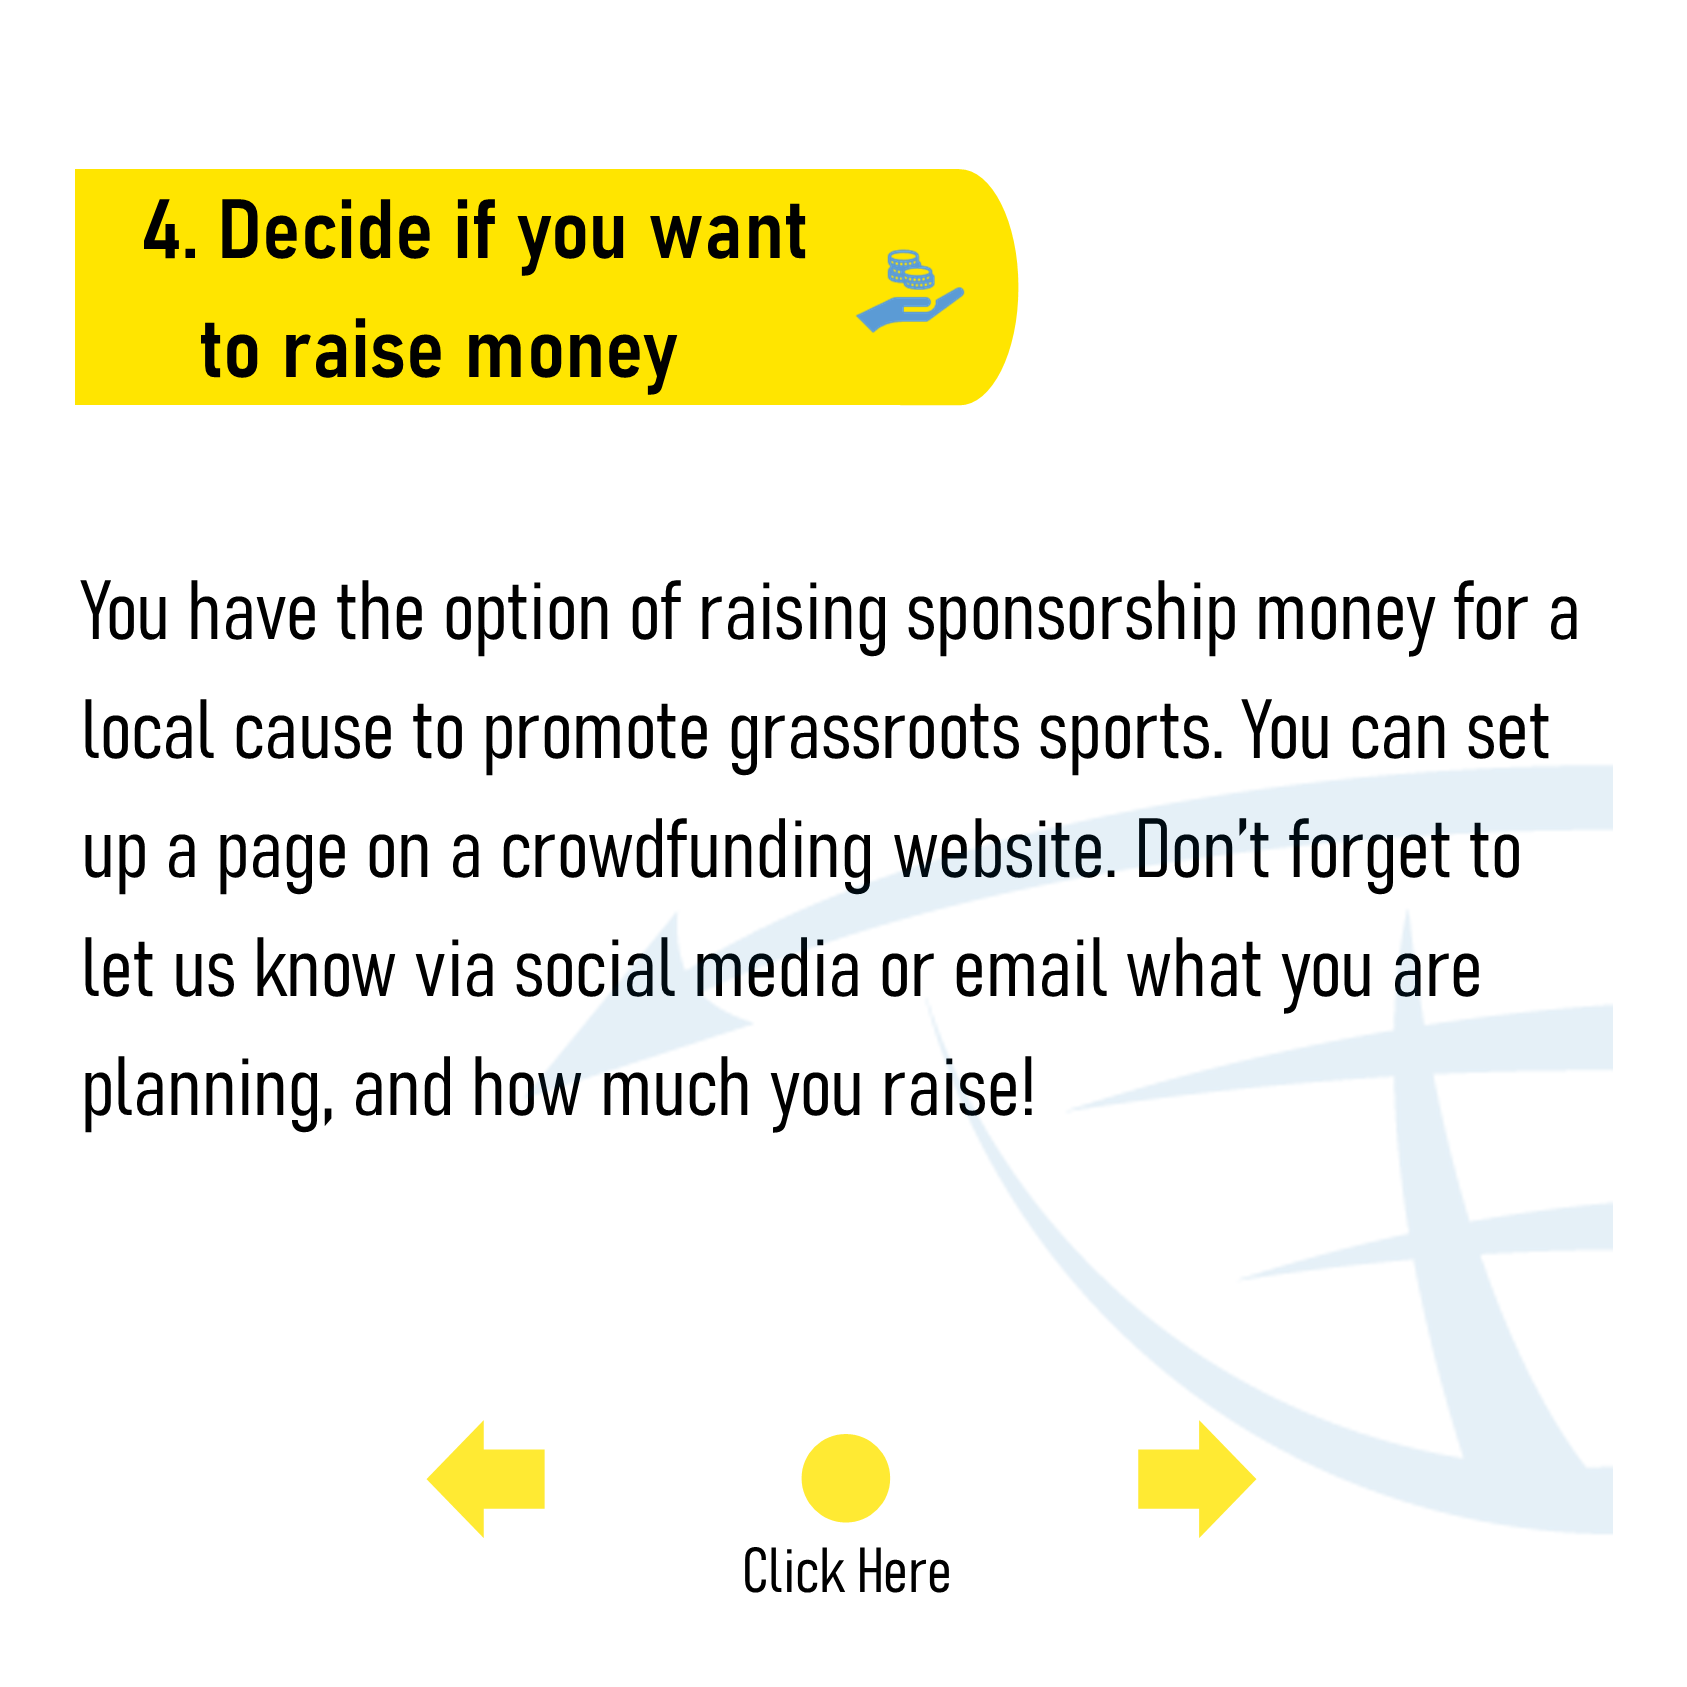 4. Decide if you want to raise money